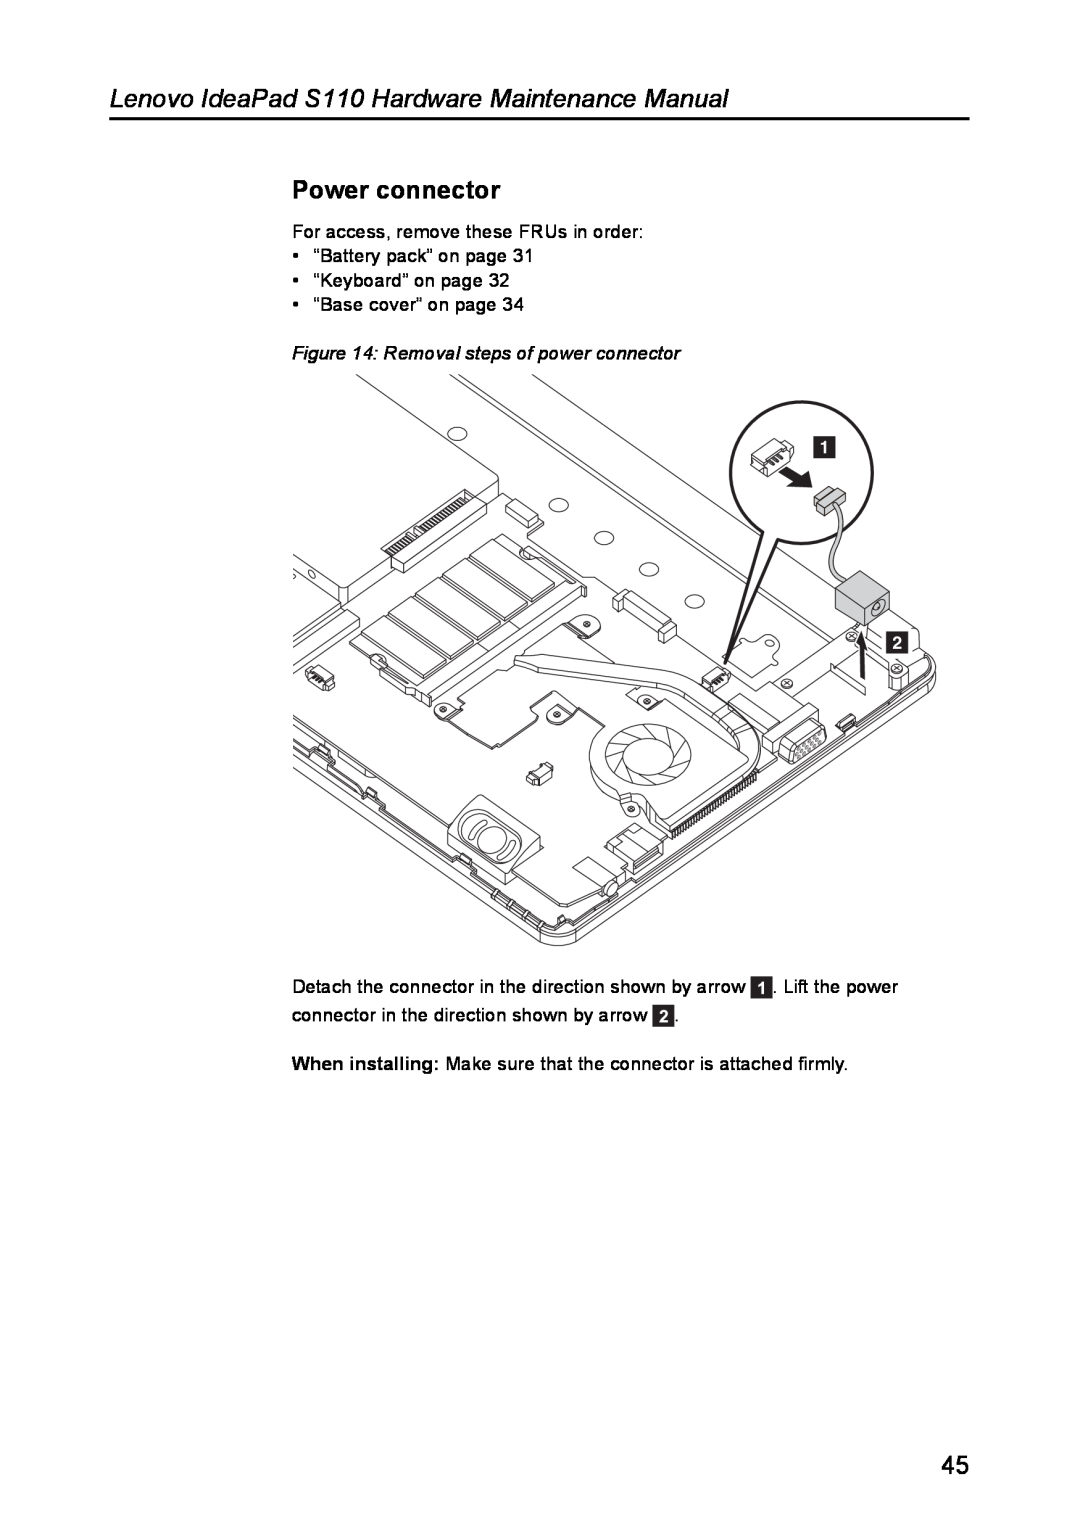 Lenovo manual Power connector, Removal steps of power connector, Lenovo IdeaPad S110 Hardware Maintenance Manual 